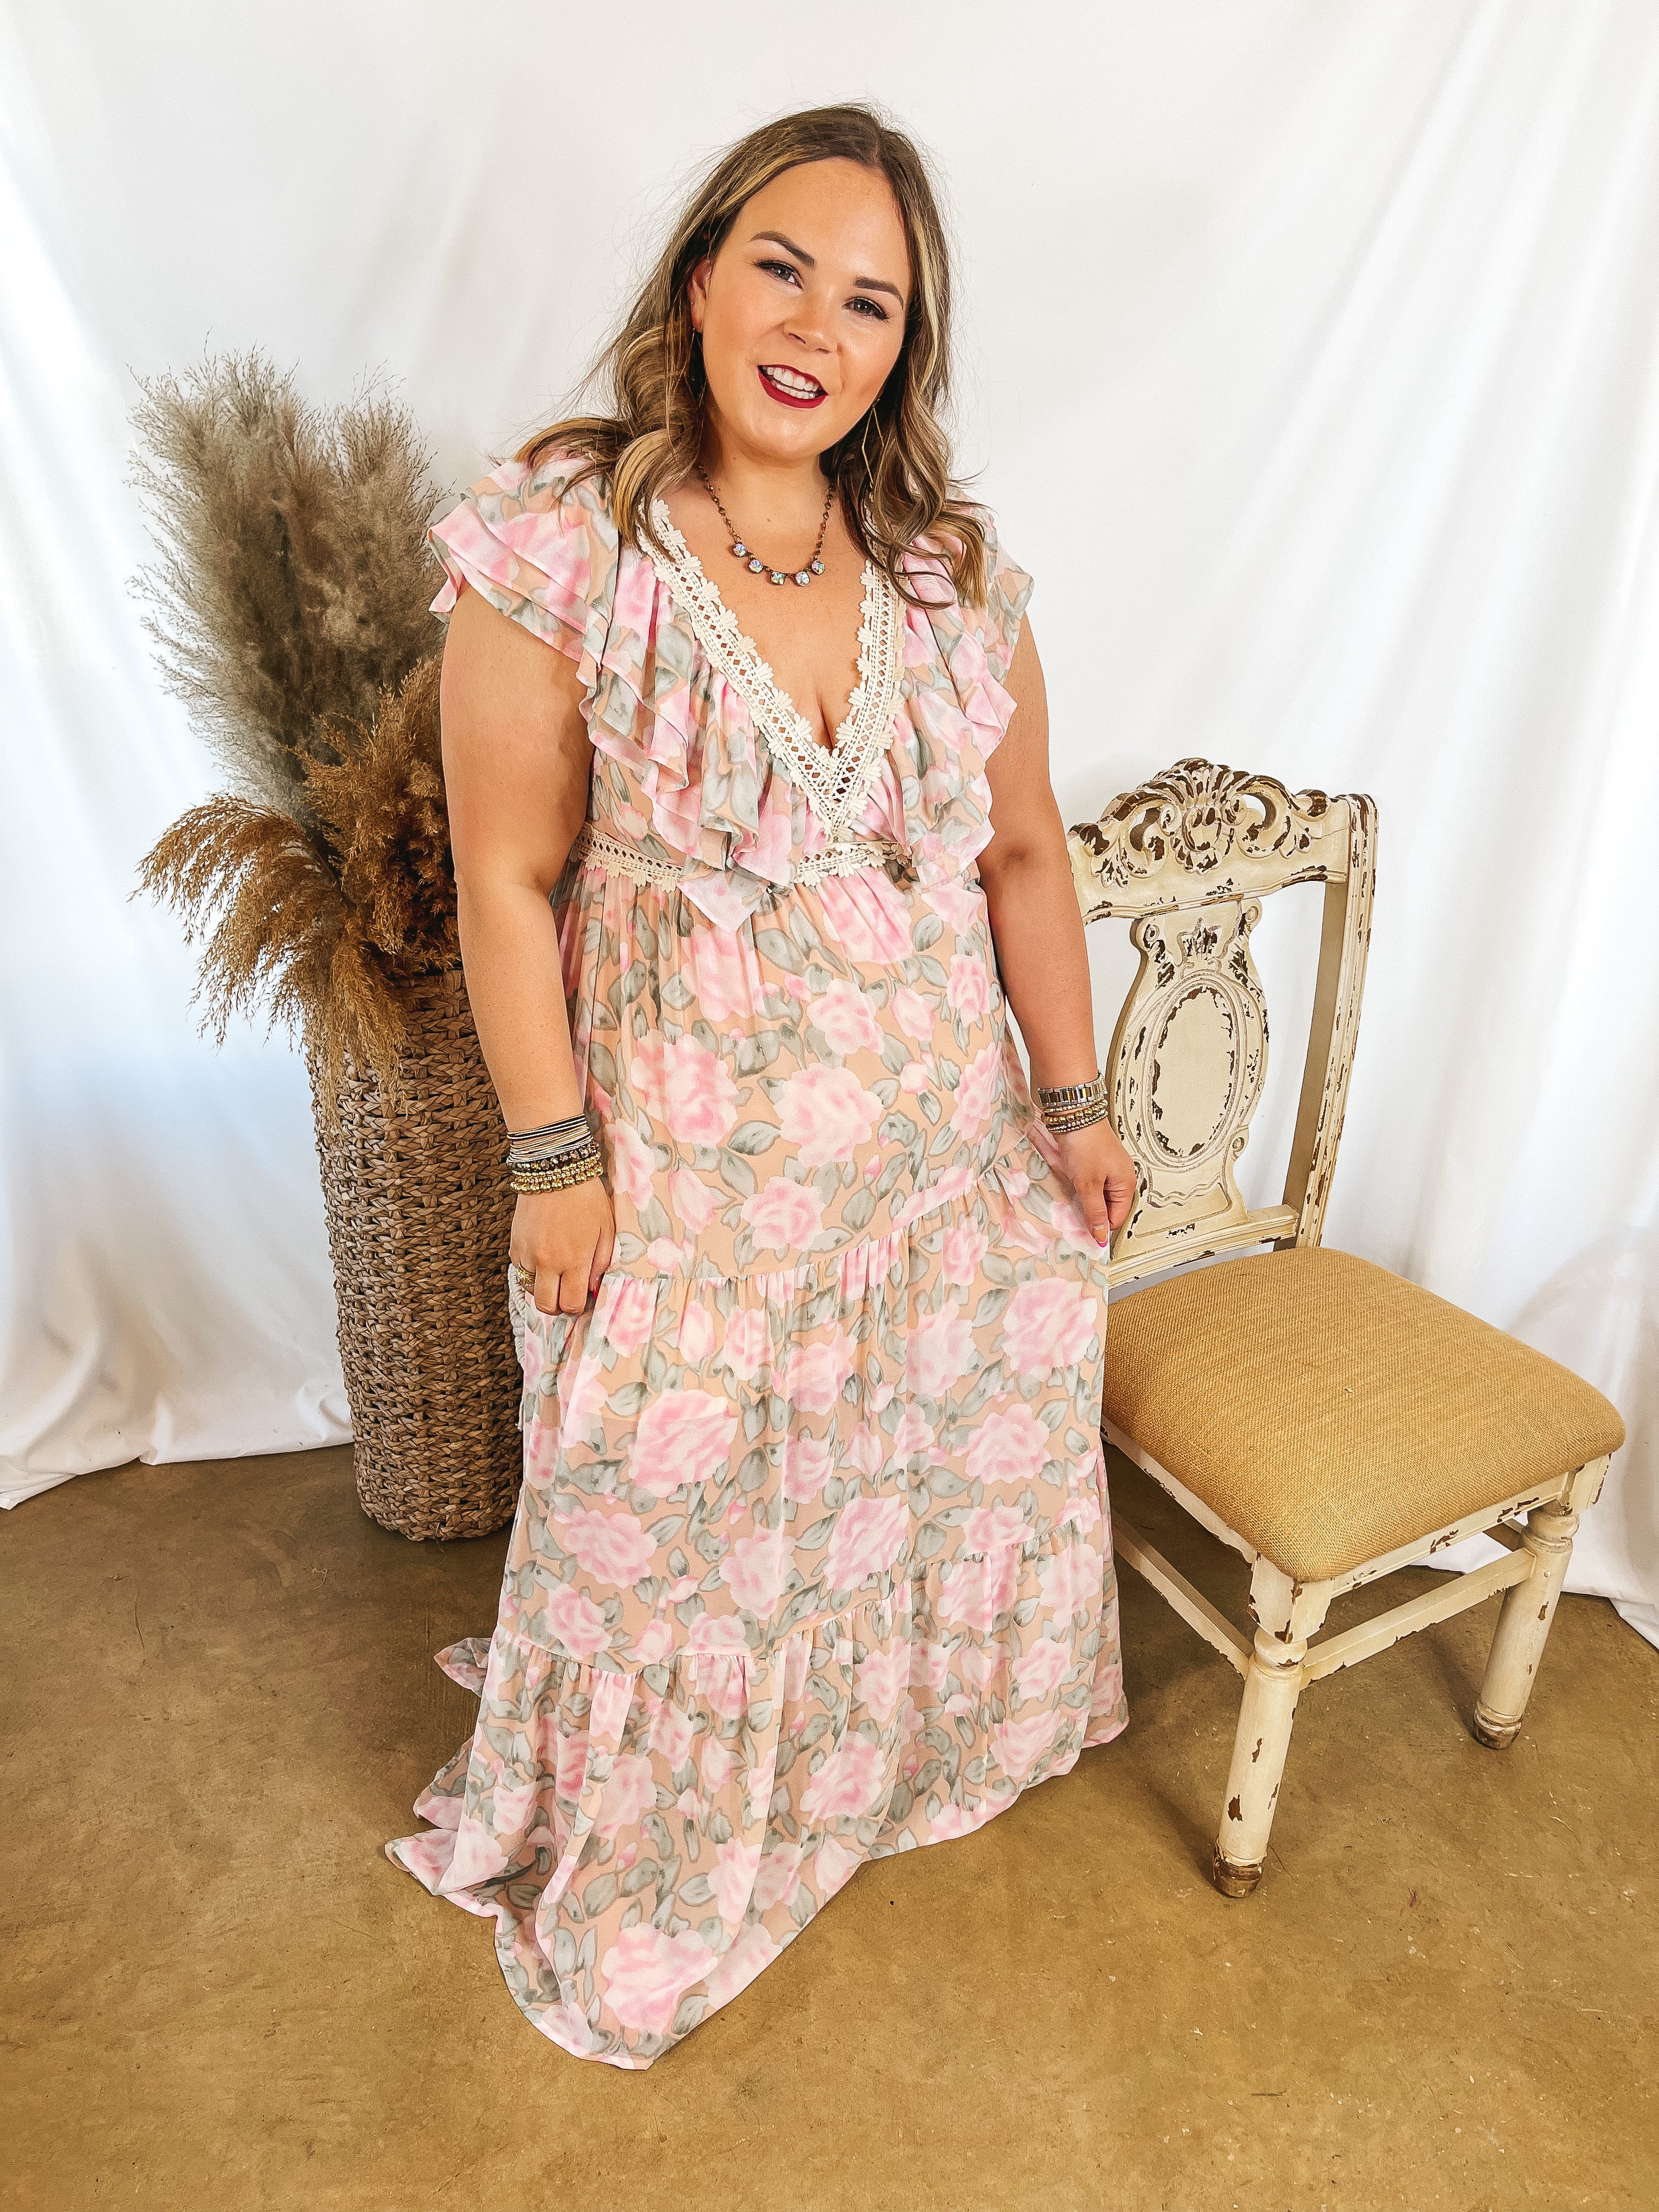 Sunlight Hours Watercolor Floral Maxi Dress with Crochet Detailing in Peach Pink - Giddy Up Glamour Boutique